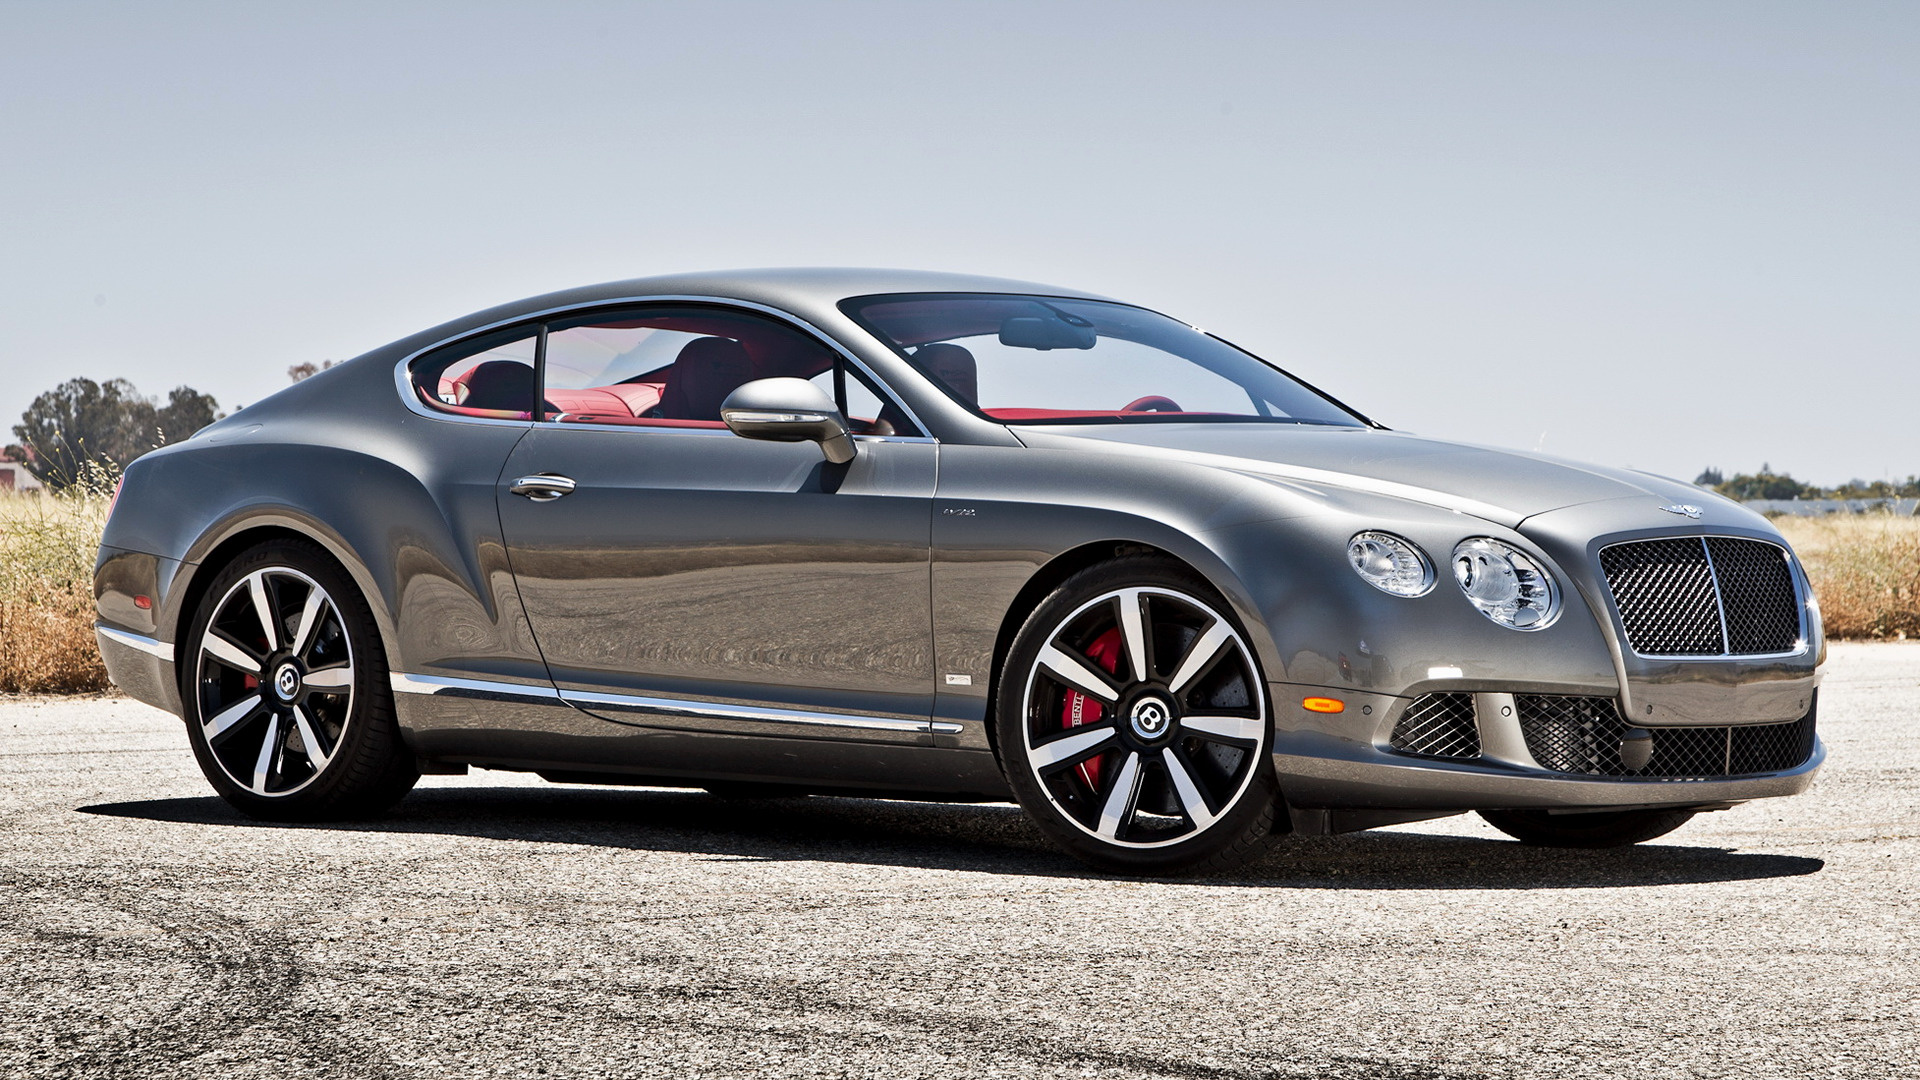 Bentley Continental Gt Speed Car Coupe Fastback Grand Tourer Luxury Car Silver Car 1920x1080